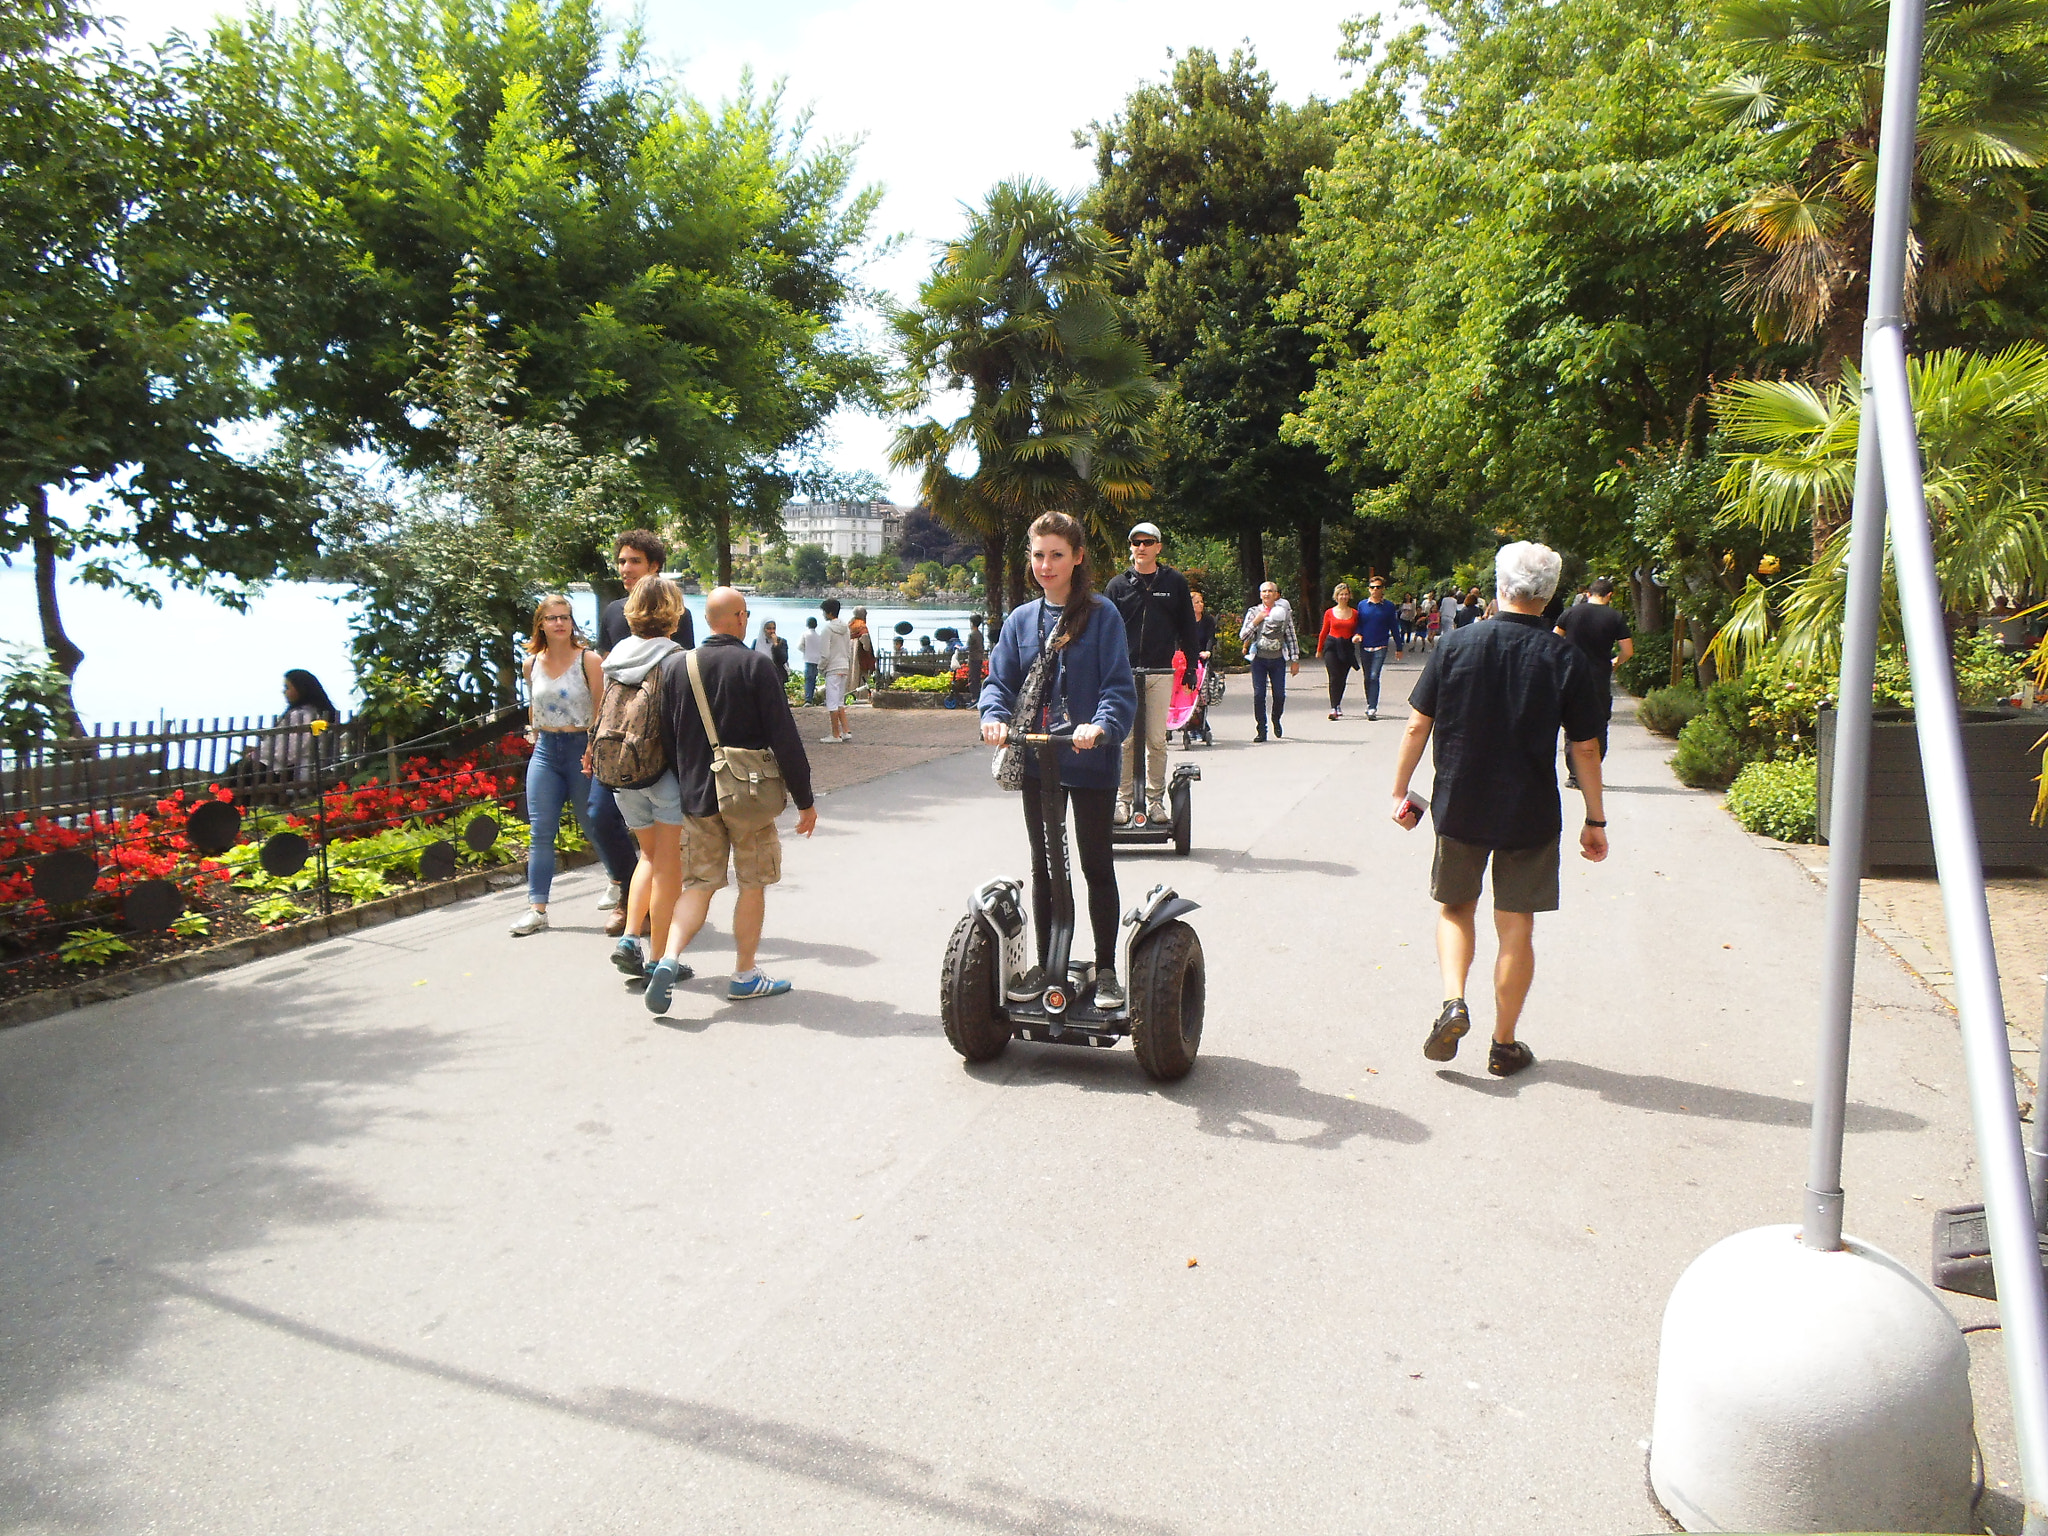 Fujifilm FinePix JZ250/JZ260 sample photo. Montreux - by segway on the promenade, they advance much quicker than we photography